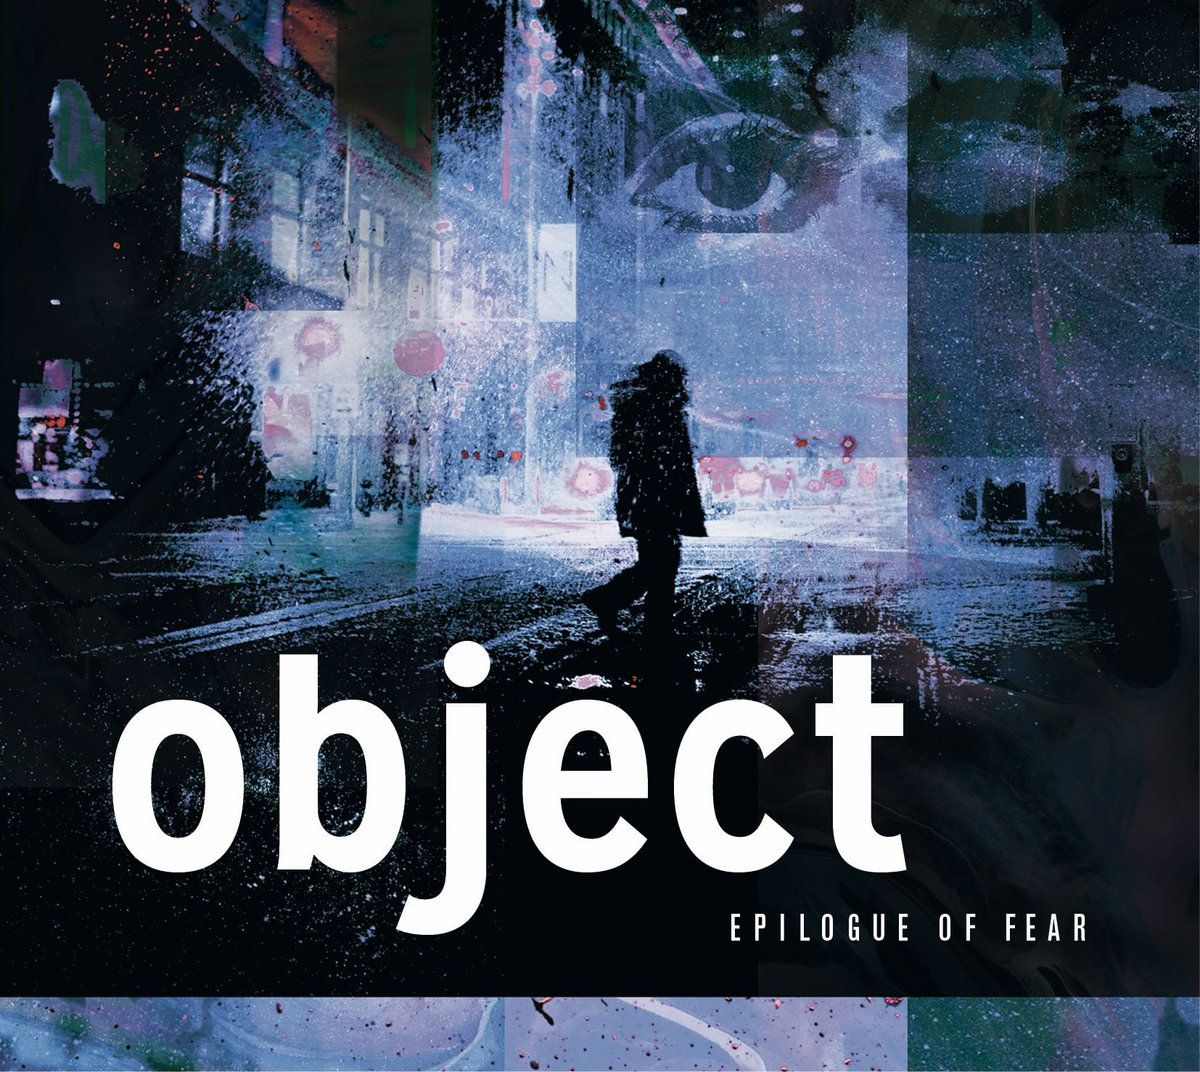 object-epilogue-of-fear-album-cover.jpg